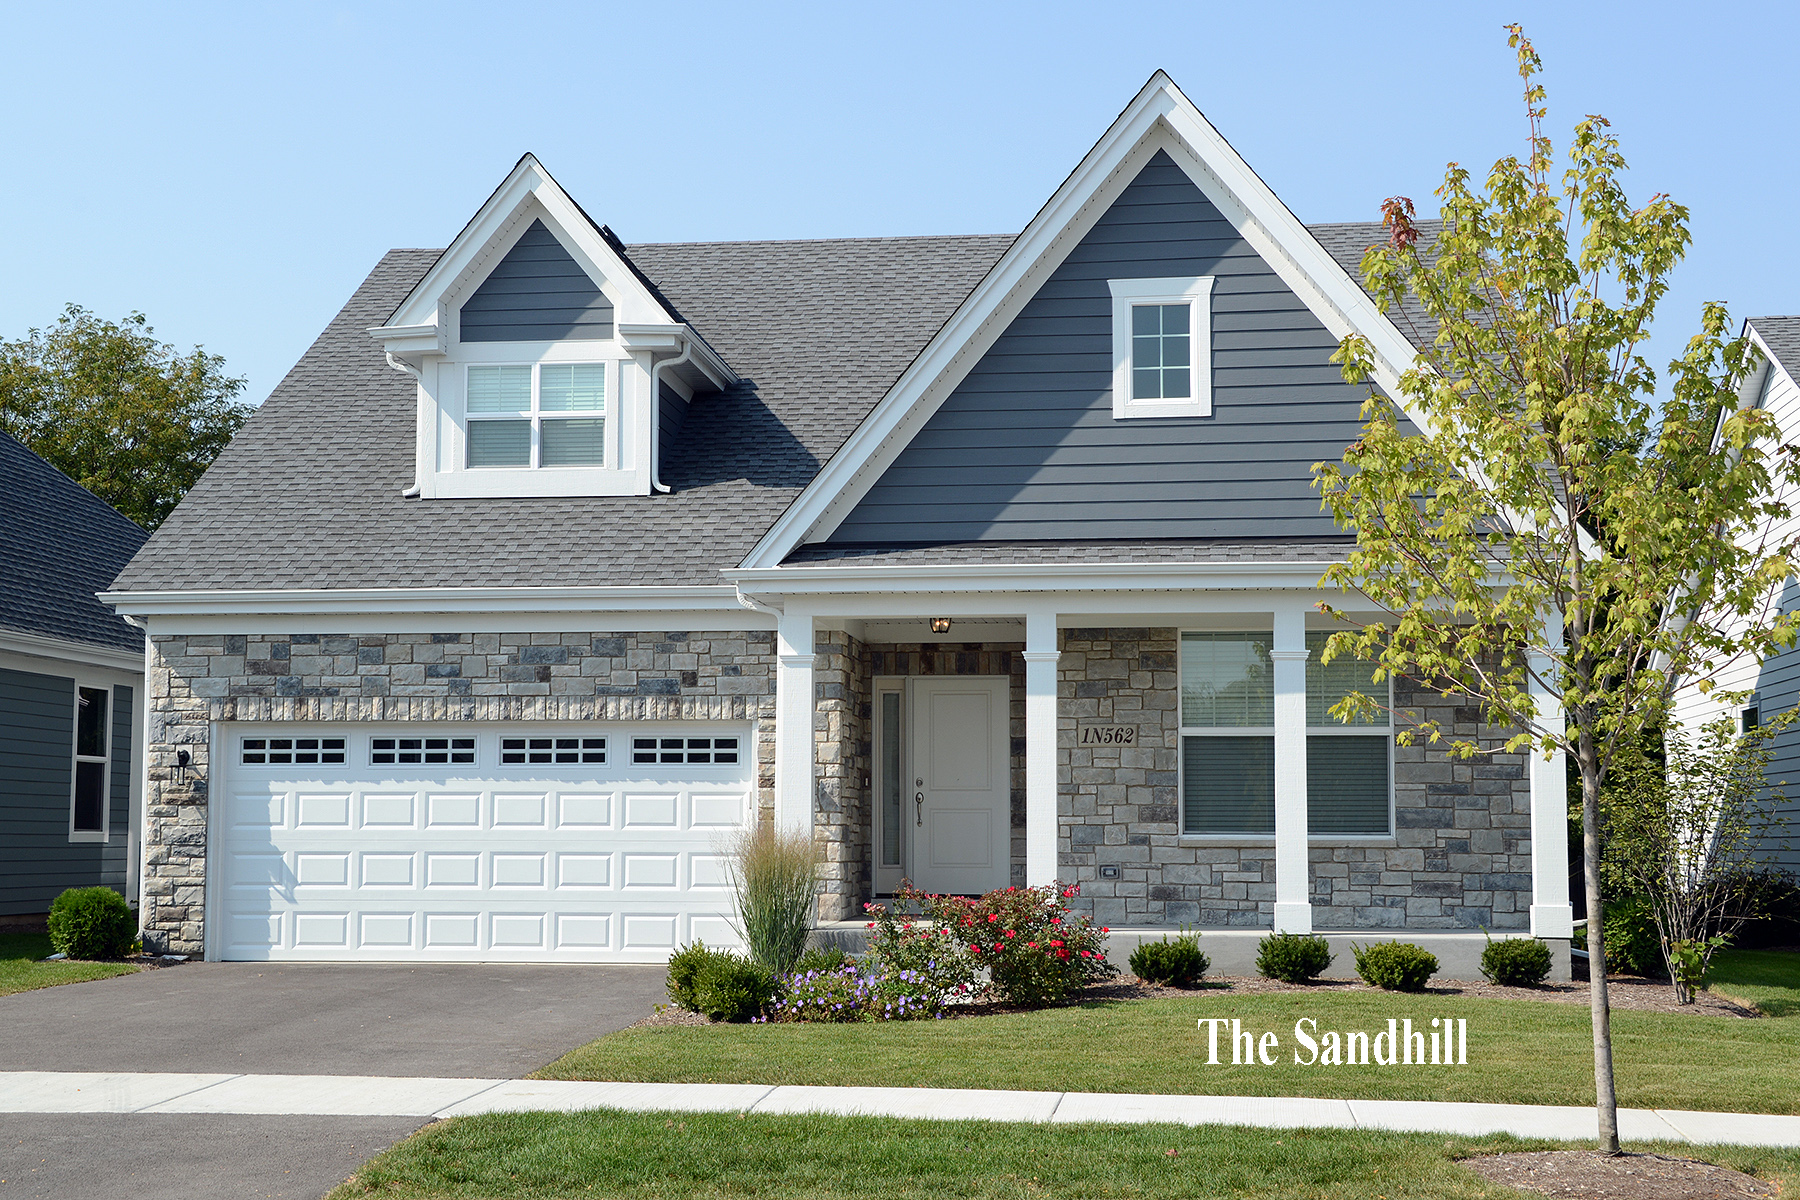 Sandhill option for new home building with Airhart Construction